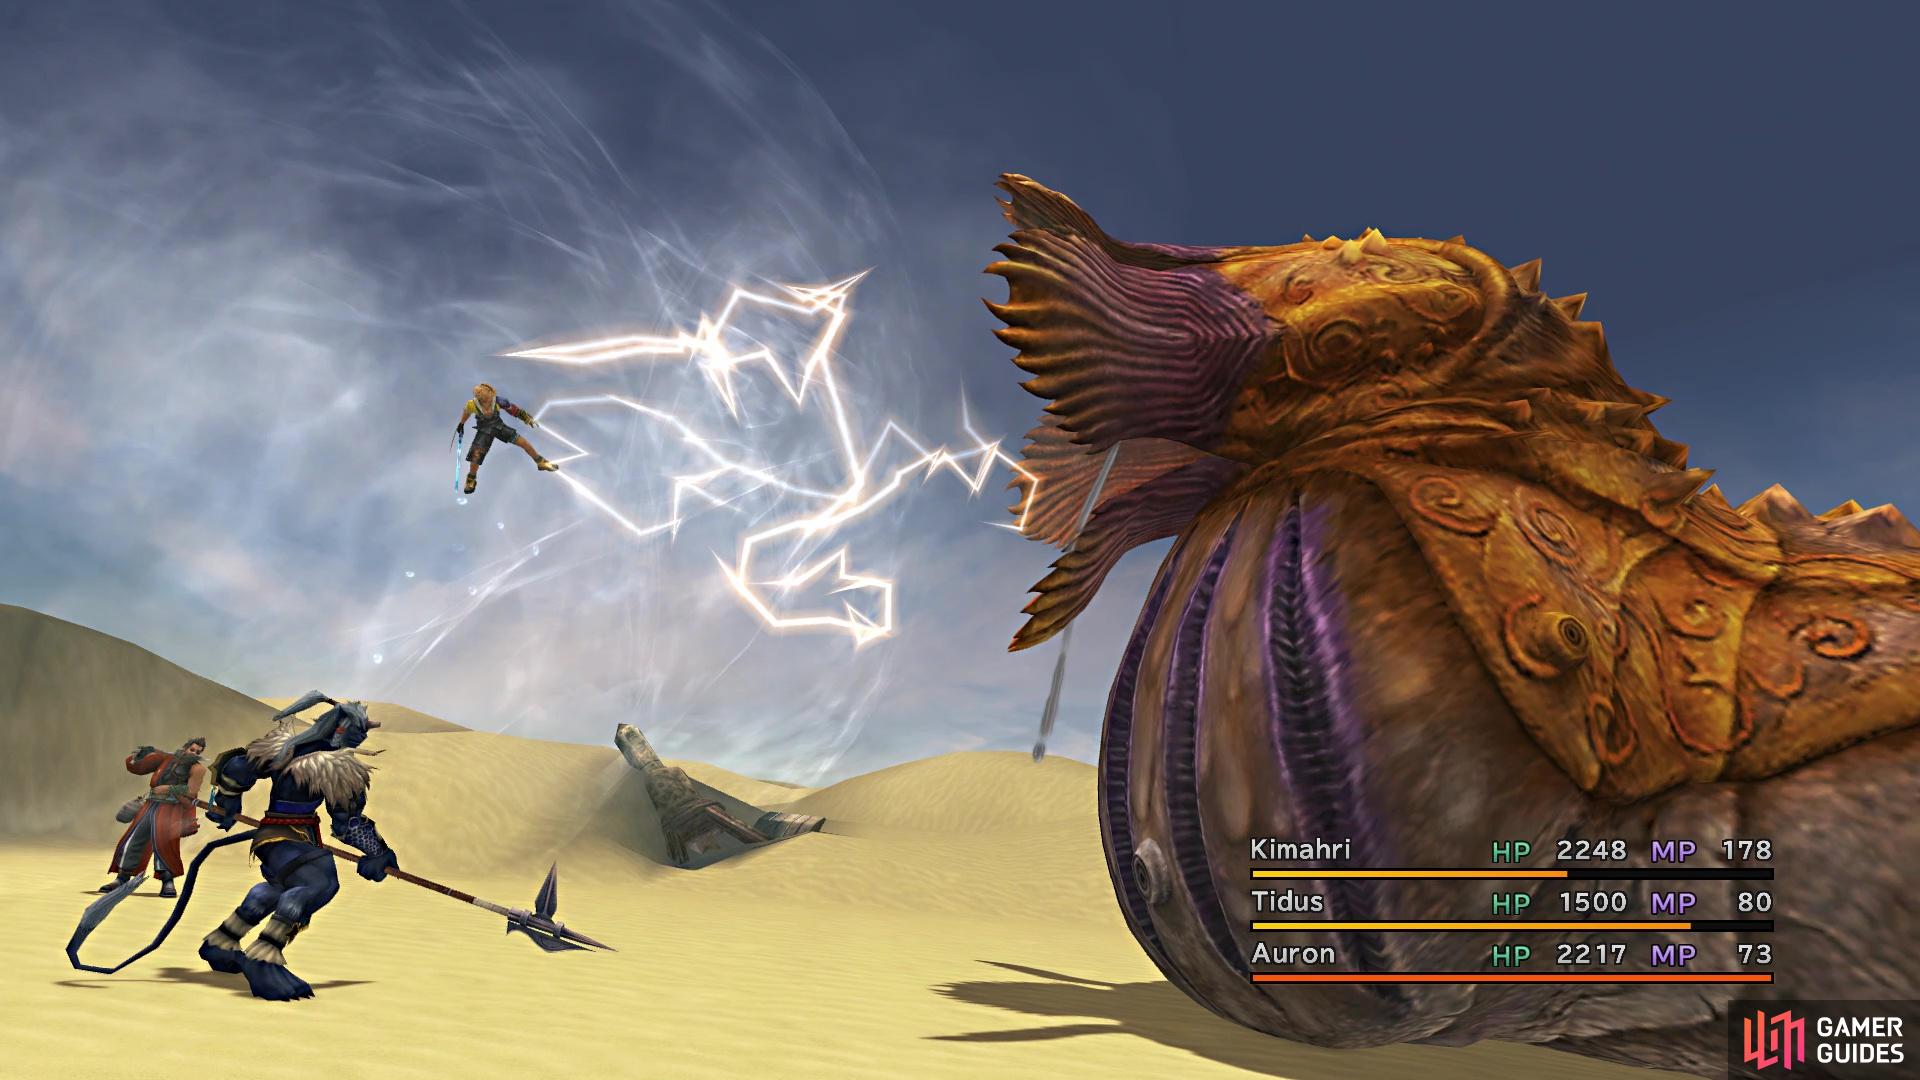 The Sand Worm can remove a party member from battle with Swallow